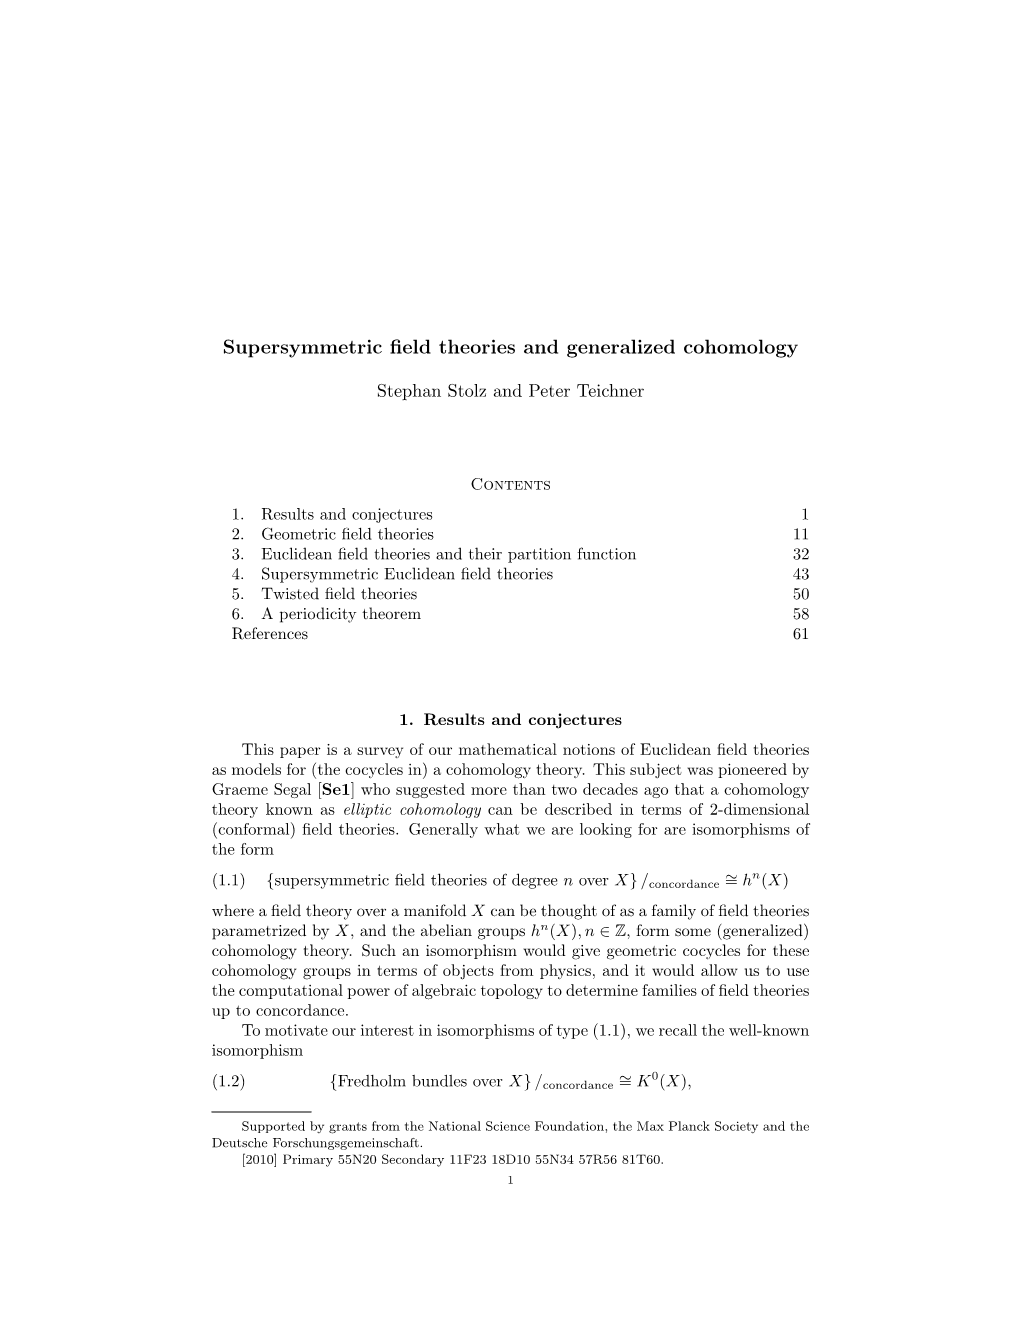 Supersymmetric Field Theories and Generalized Cohomology